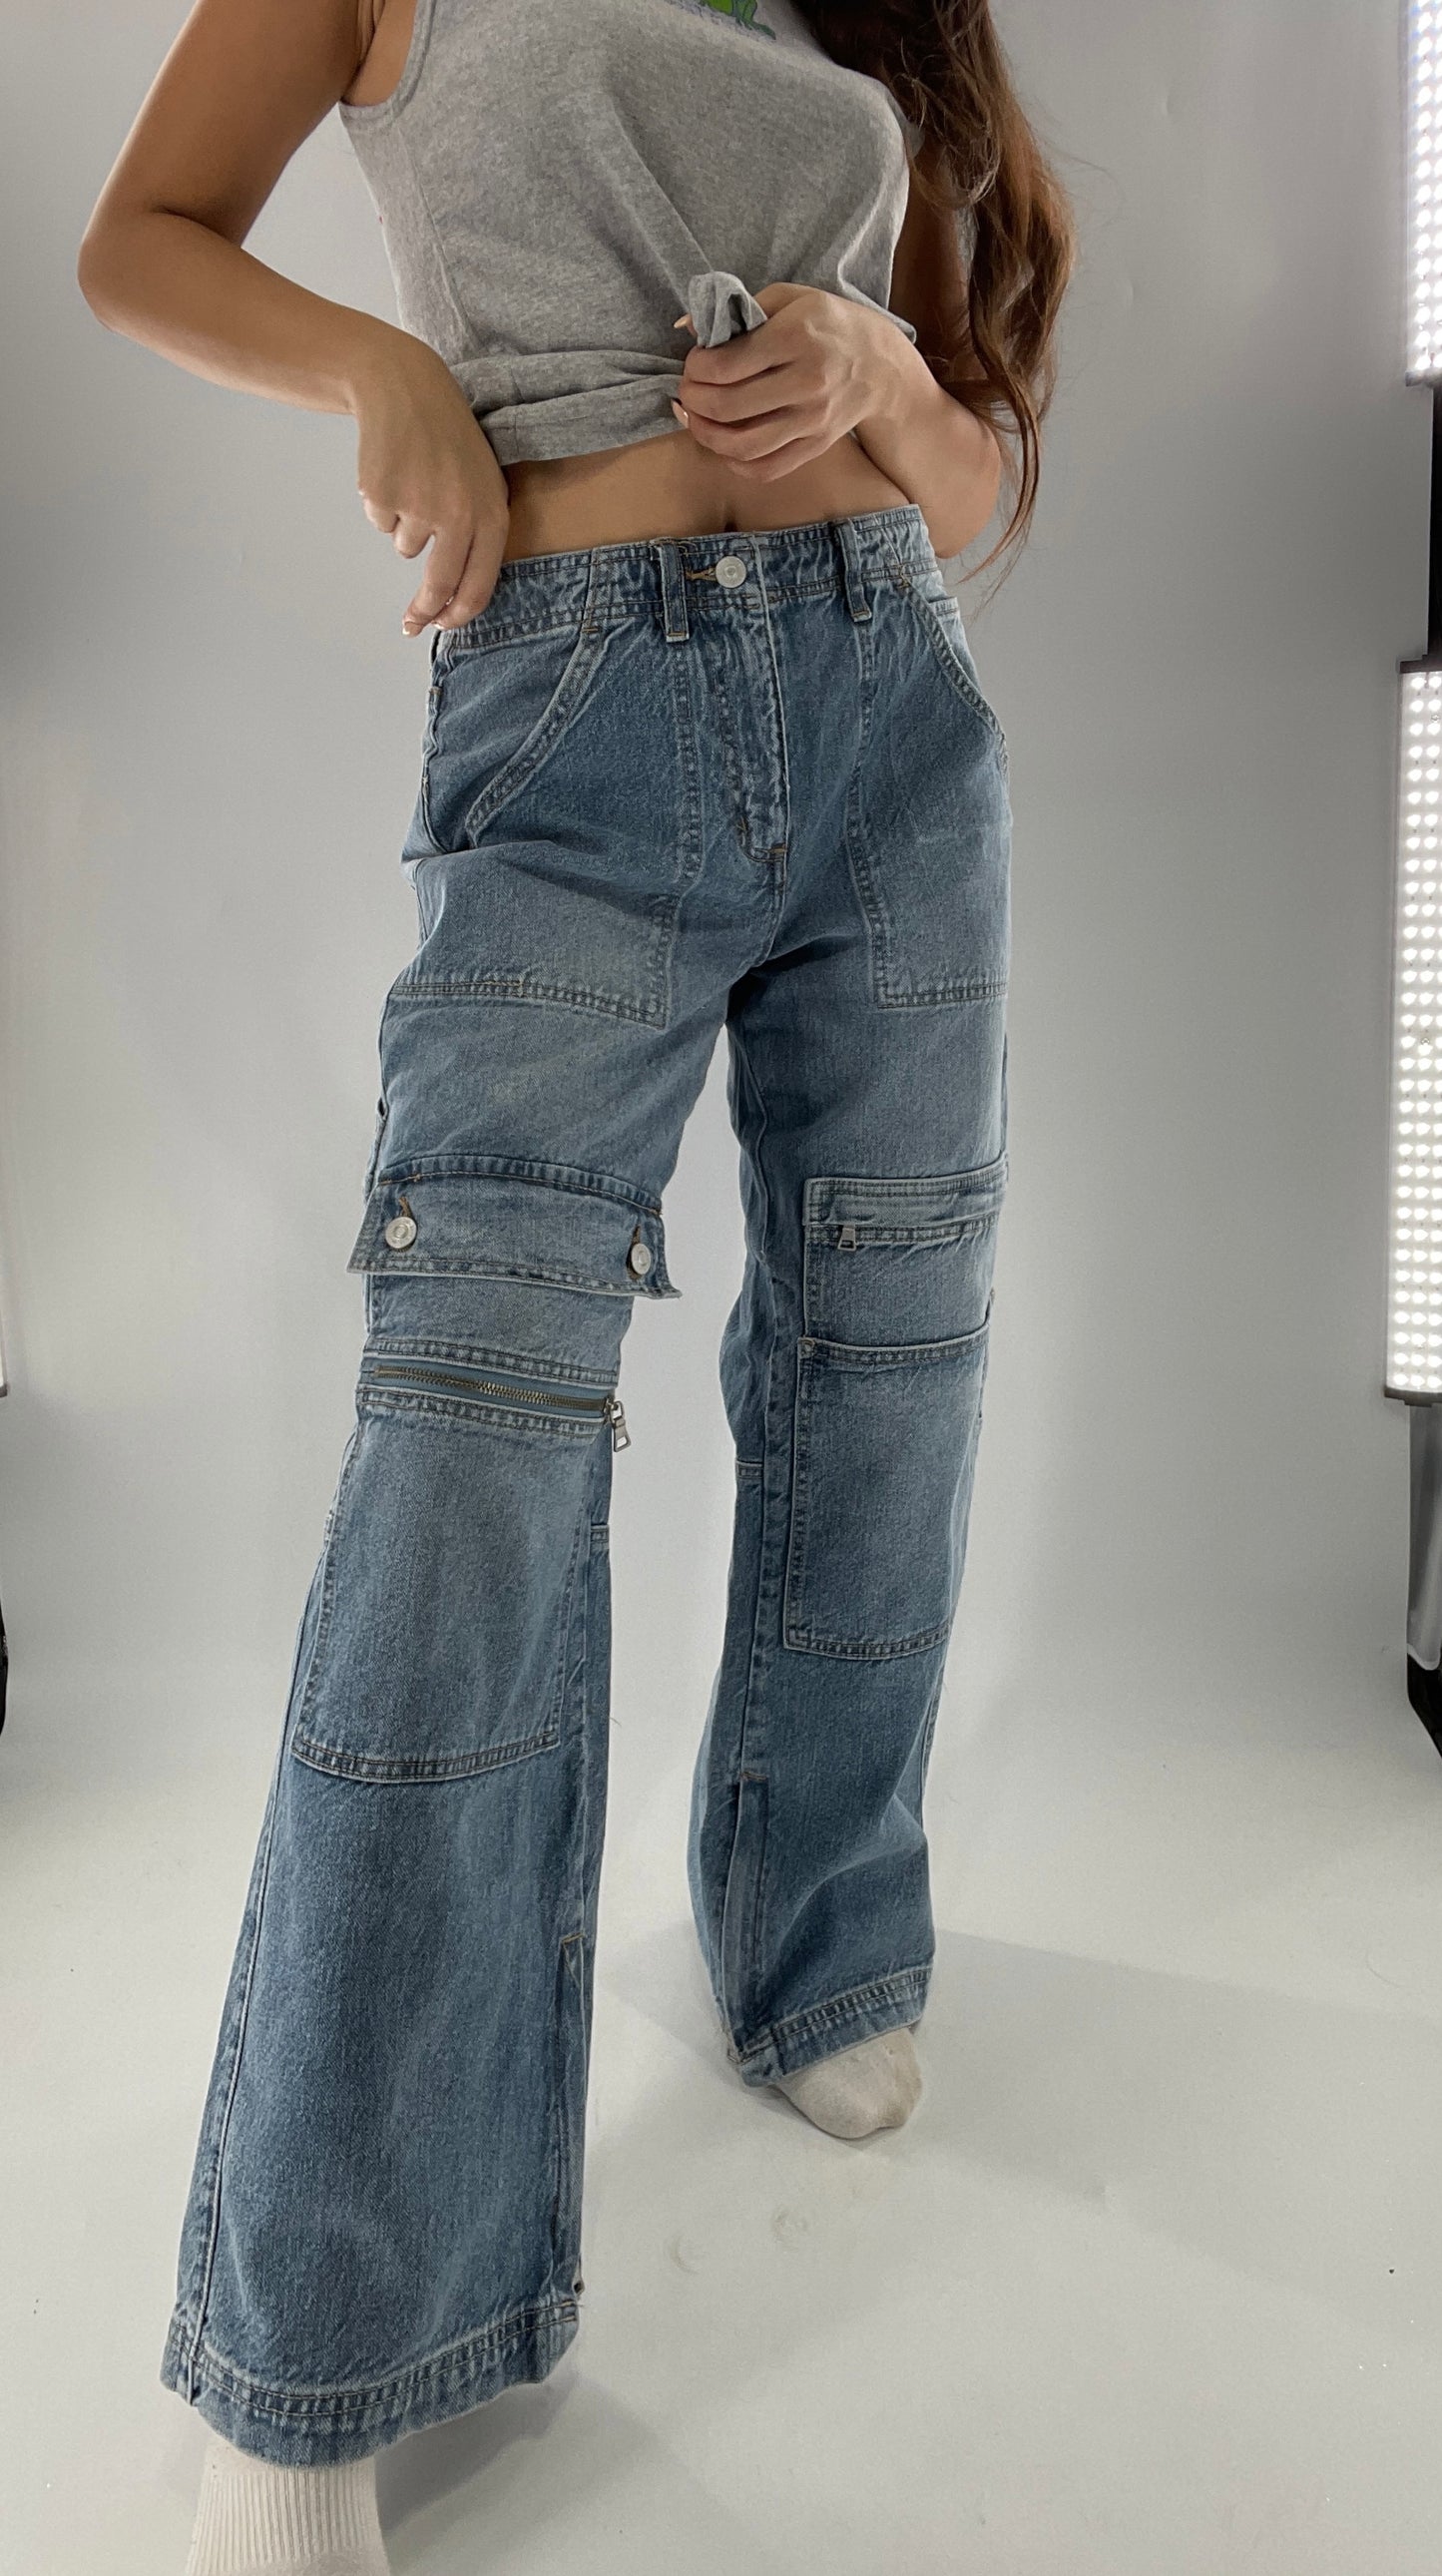 Free People Wide Leg Cargo Jeans Covered in Pockets, Zippers and stitching  (27)